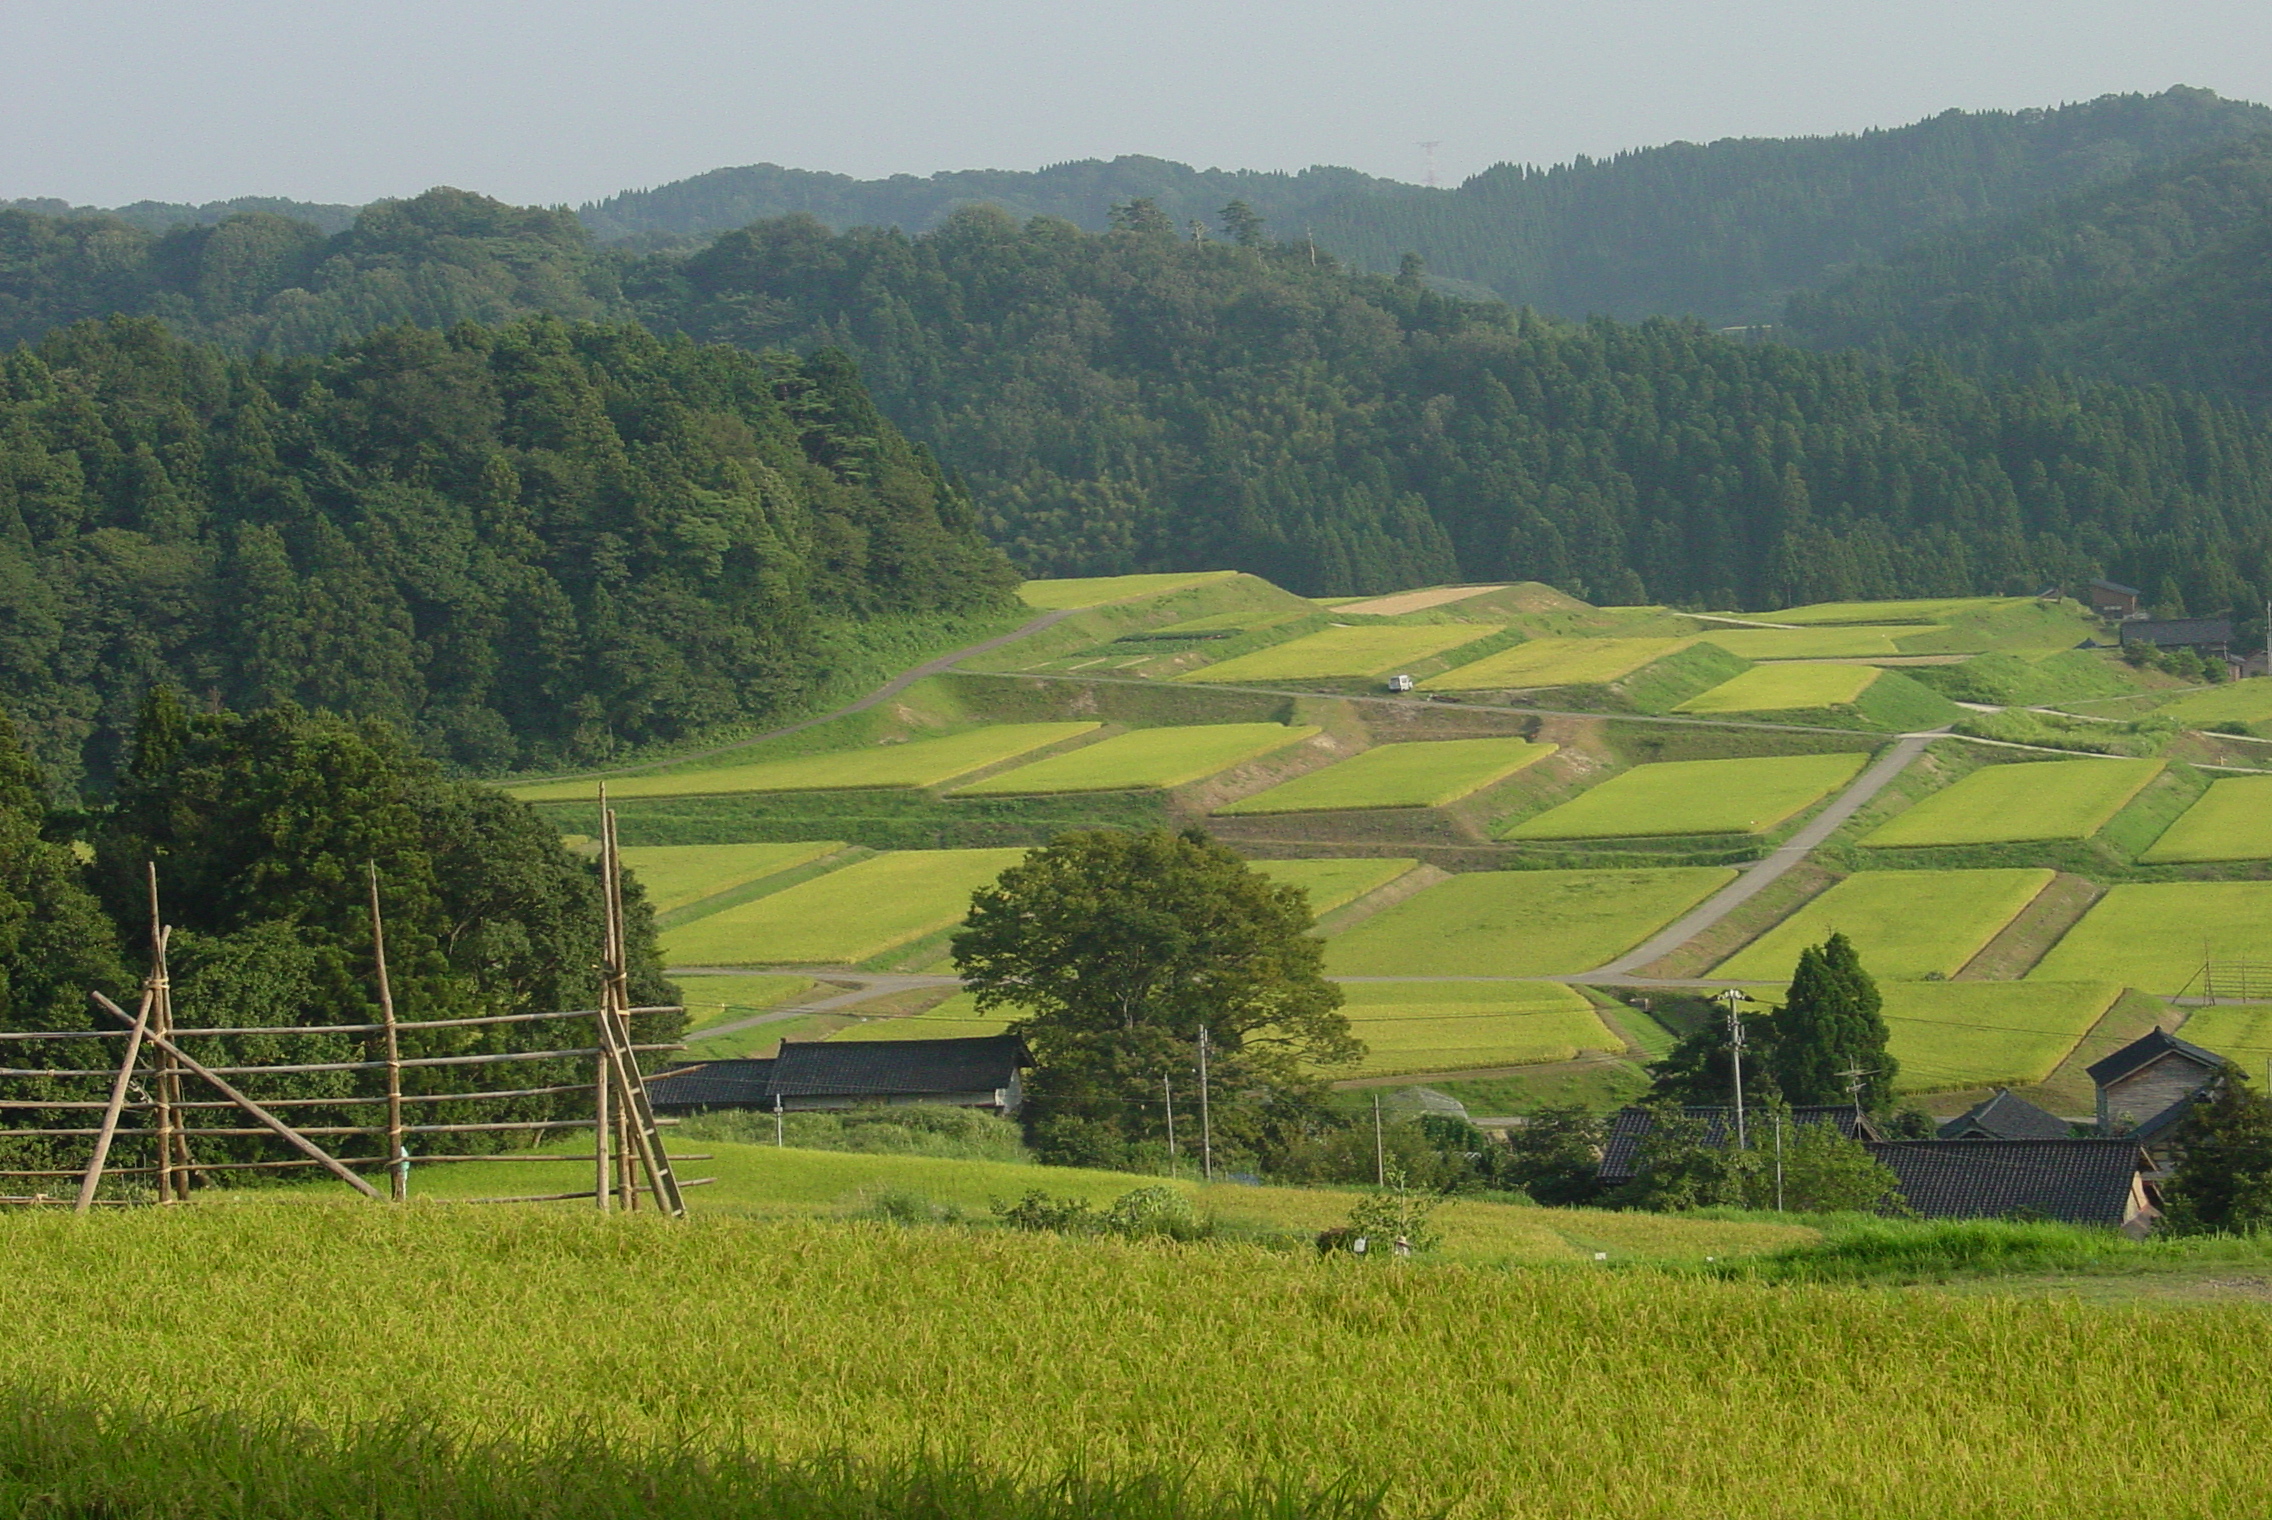 This is true autumn in Japan. Recommended spots for rural landscapes